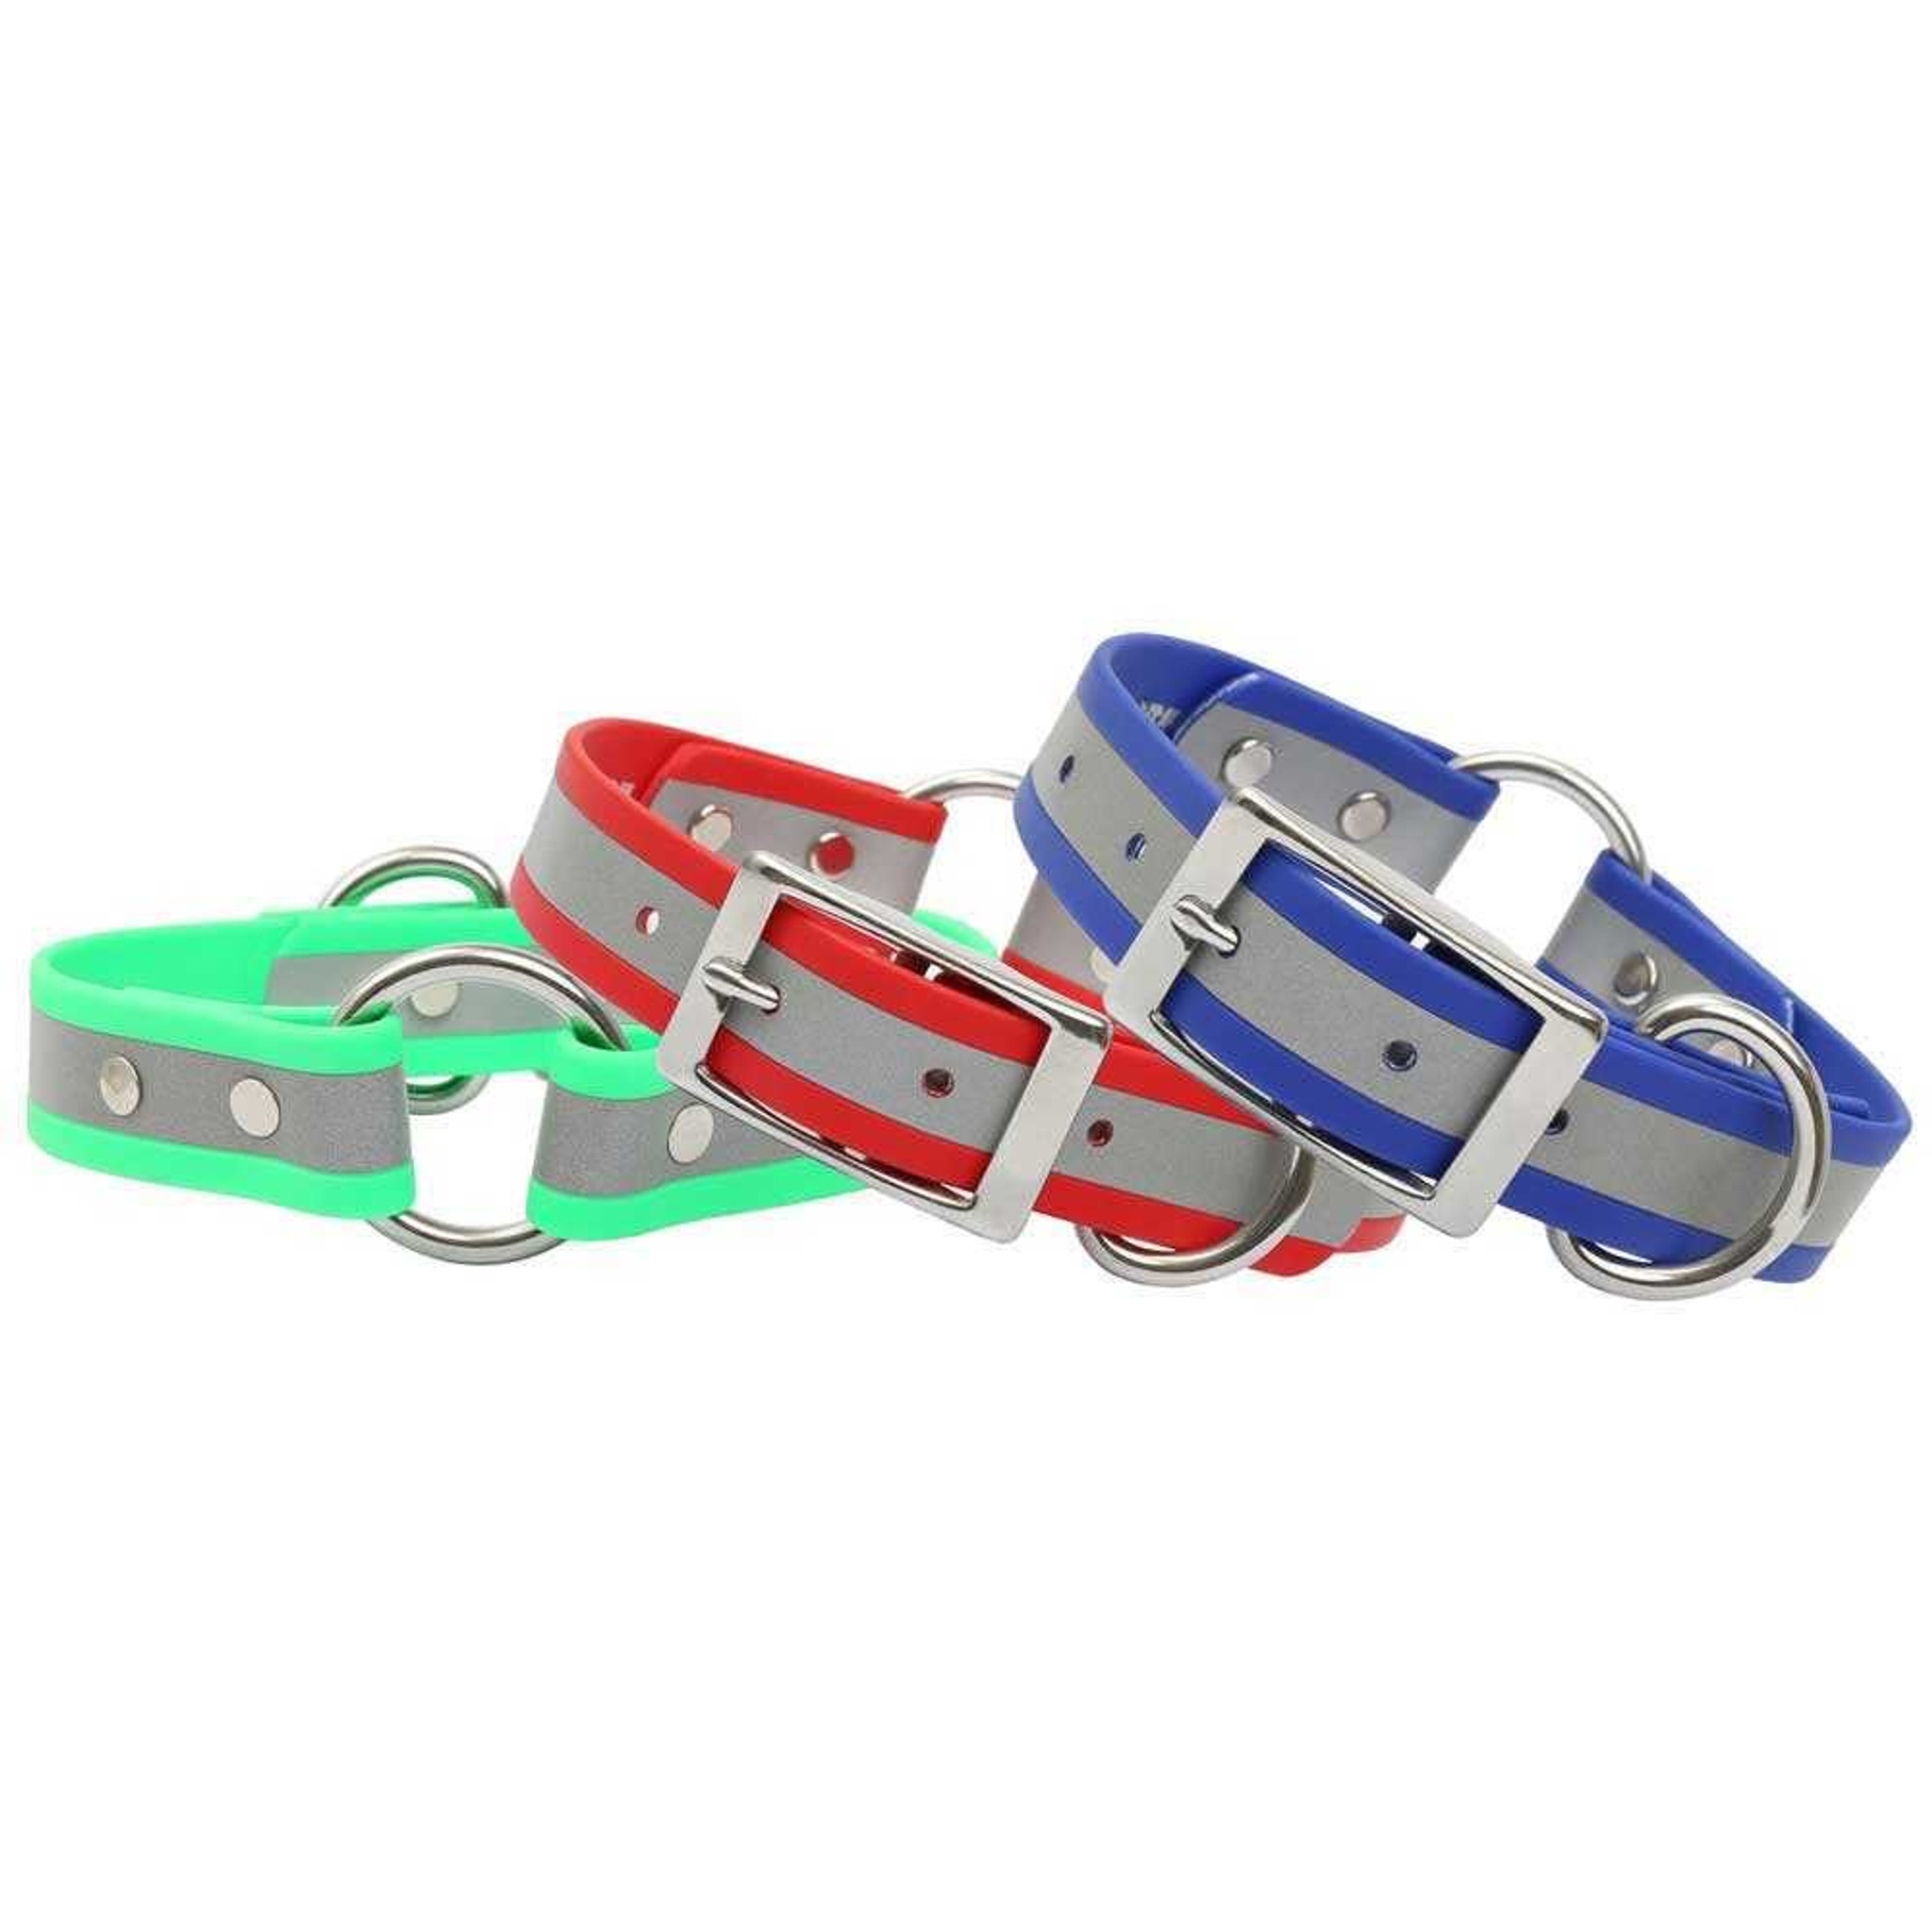 Reflective Collar For Dogs